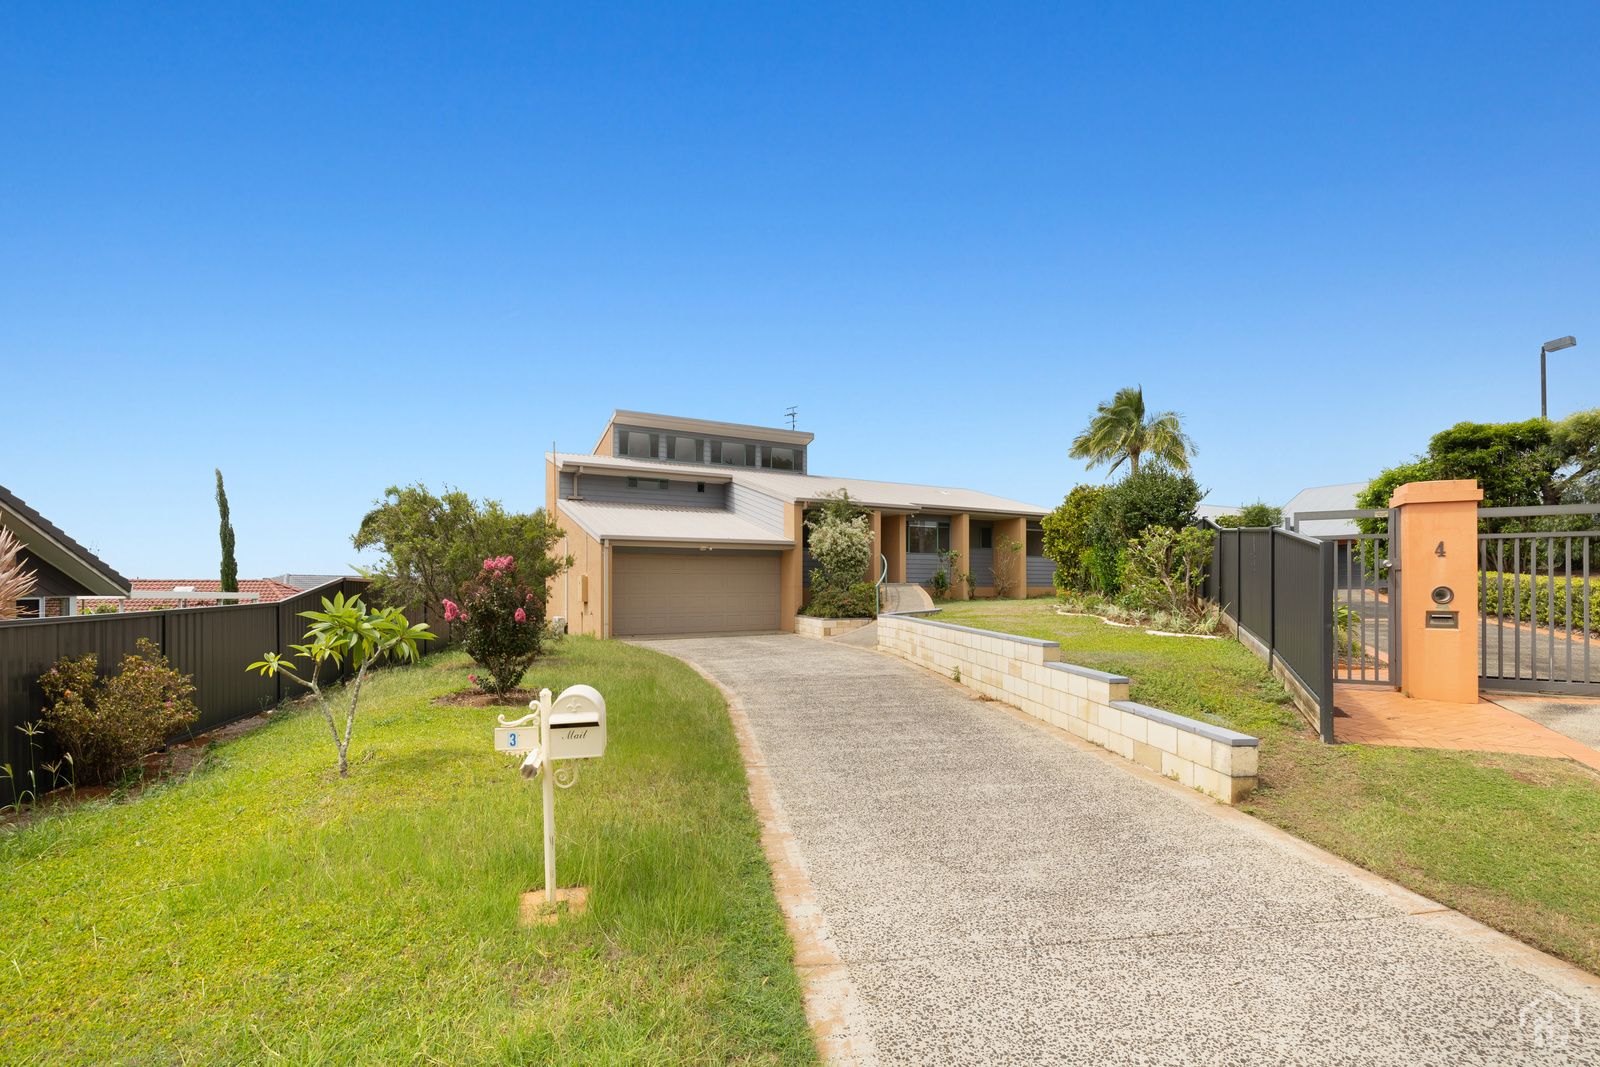 5 bedrooms House in 3 Bellerive Place BANORA POINT NSW, 2486